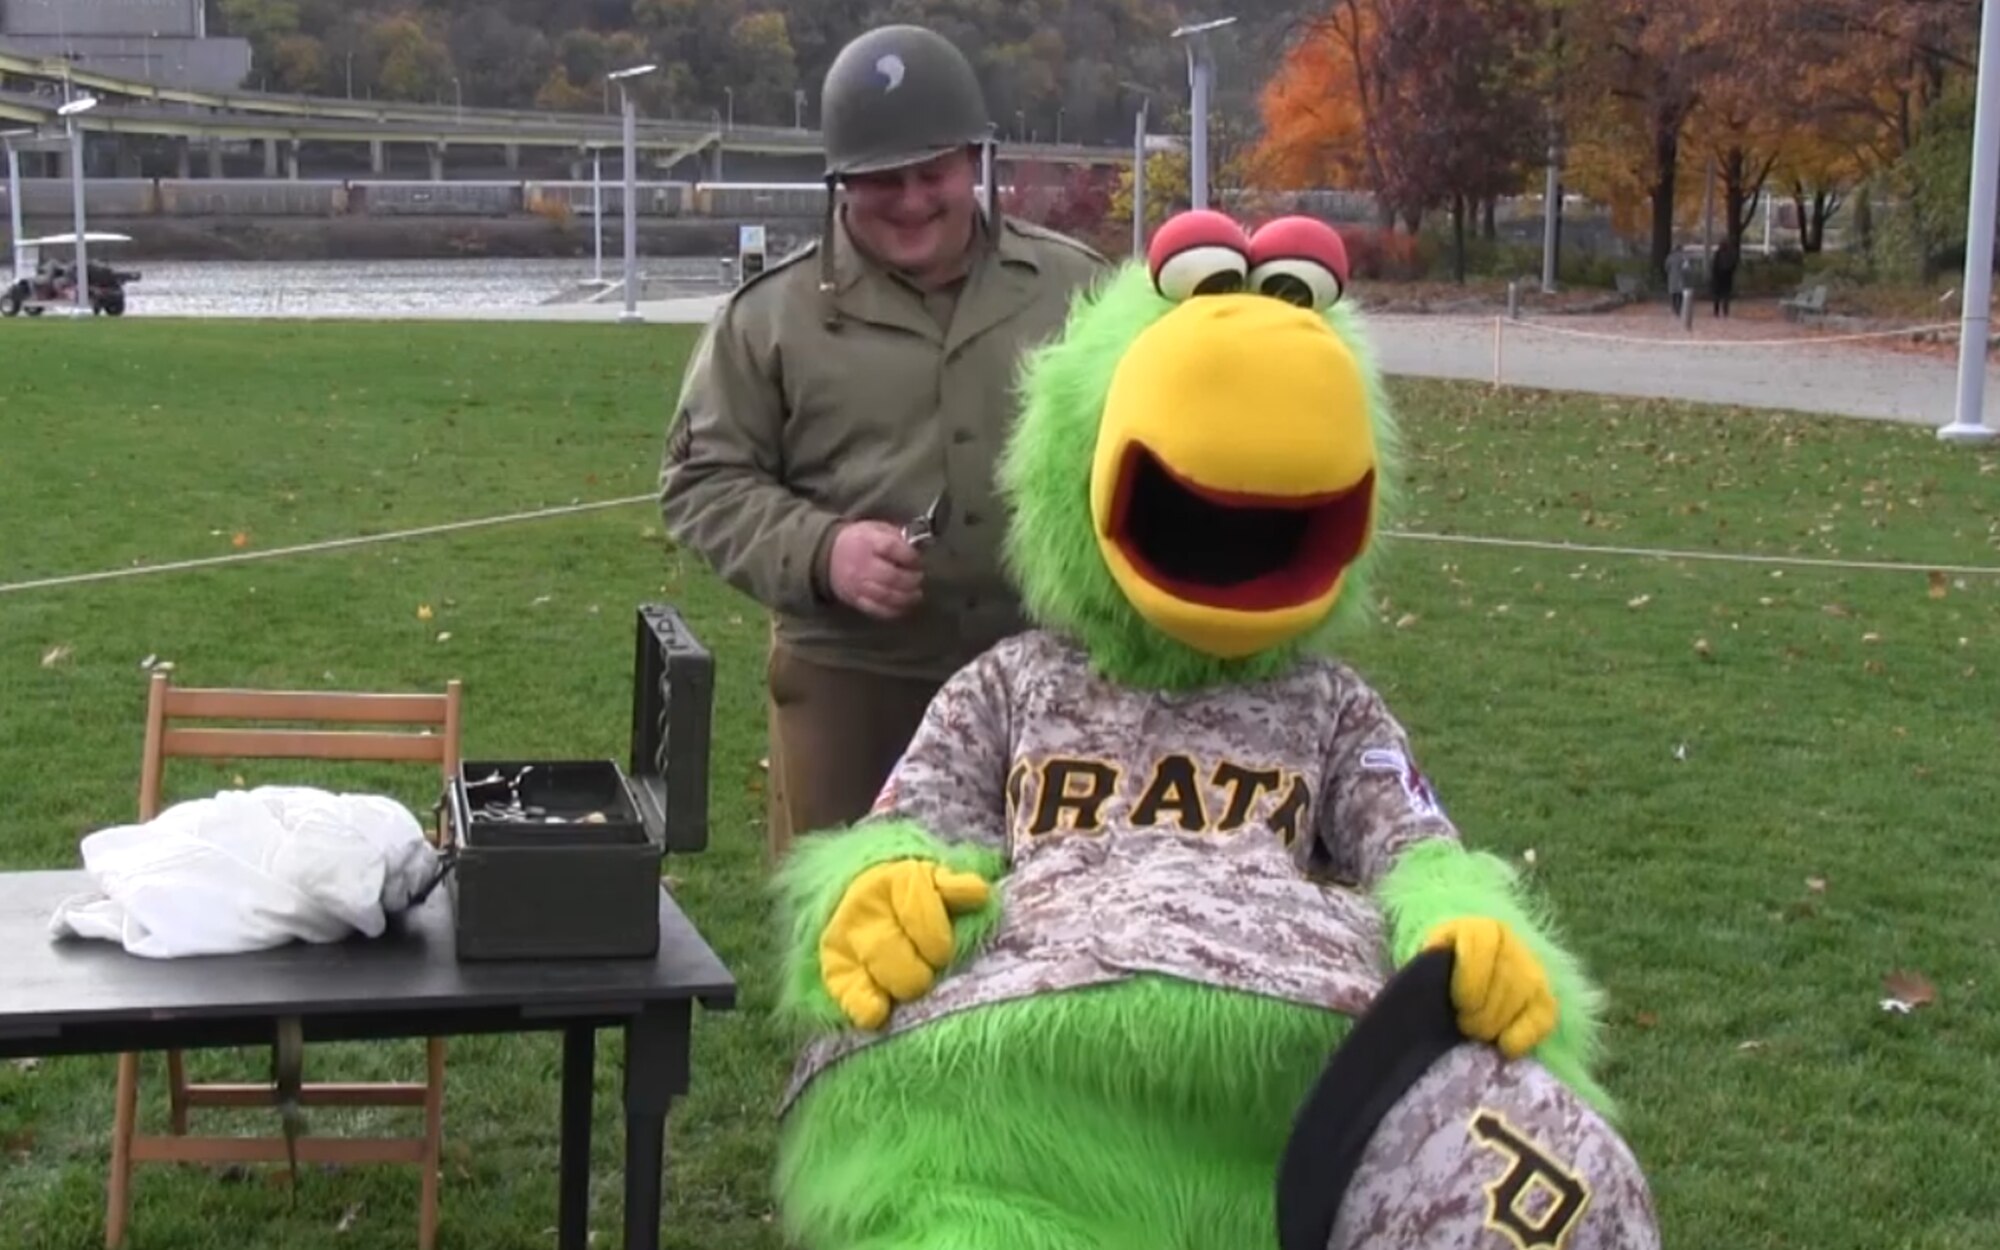 The Pirate Parrot gets a trim and a shave by a World War II field barber. The Pennsylvania National Guard joined with the Pennsylvania Department of Conservation of Natural Resources' Point State Park and the Association of the United States Army to organize Steel City Salutes the Troops, Pittsburgh, Nov. 7, 2015.  (U.S. Air National Guard Photo by Staff Sgt. Ryan Conley)